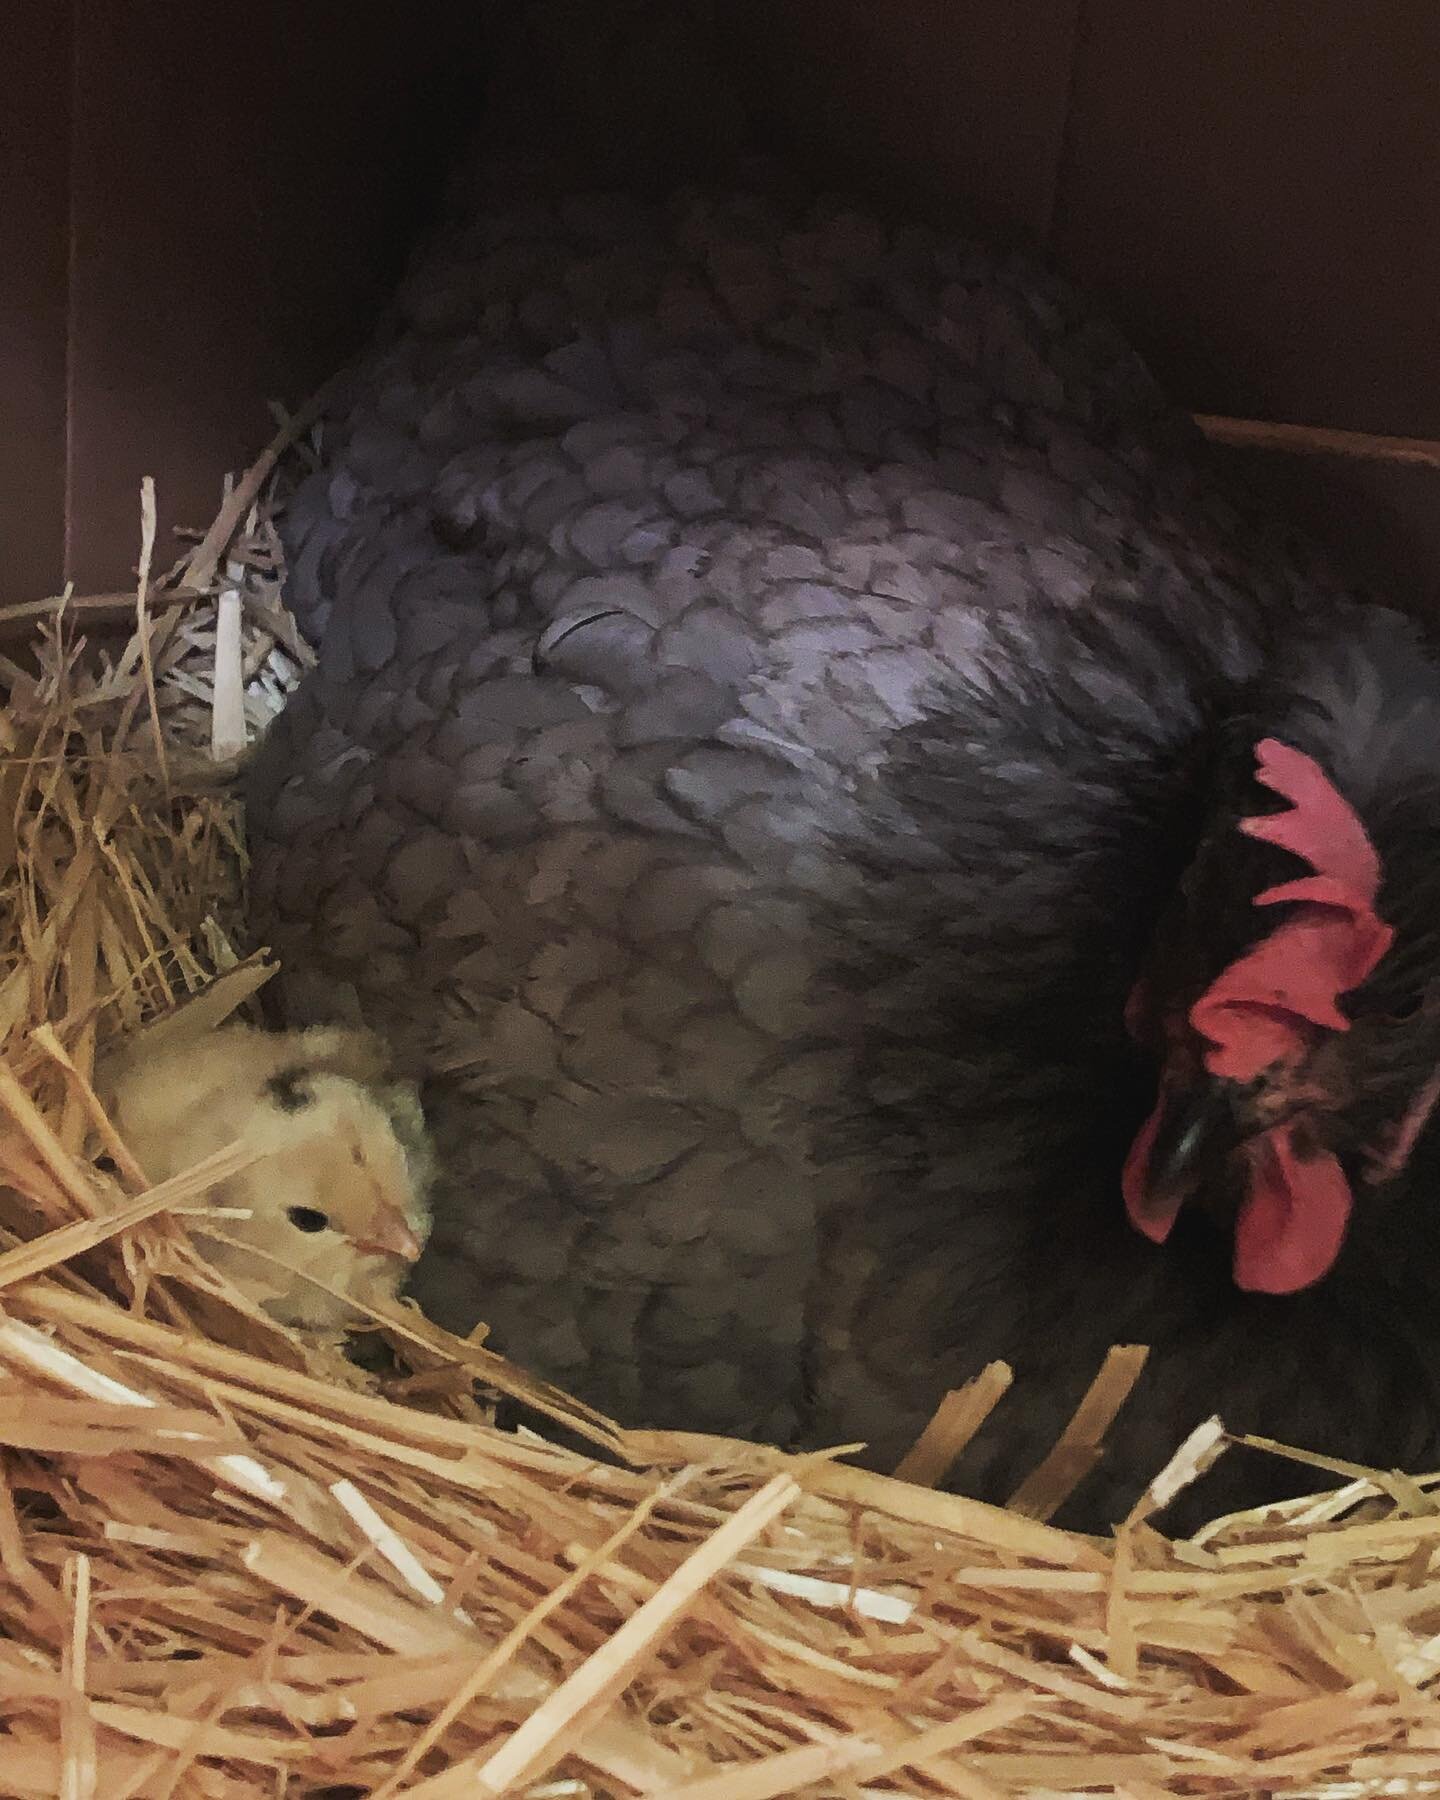 Our first homegrown chick! Pearl, the lovely mama, is still sitting on four&hellip; fingers crossed 💜 #hatchday🐣 #backyardchickens #lovemyhens💕🐓 #galianoisland